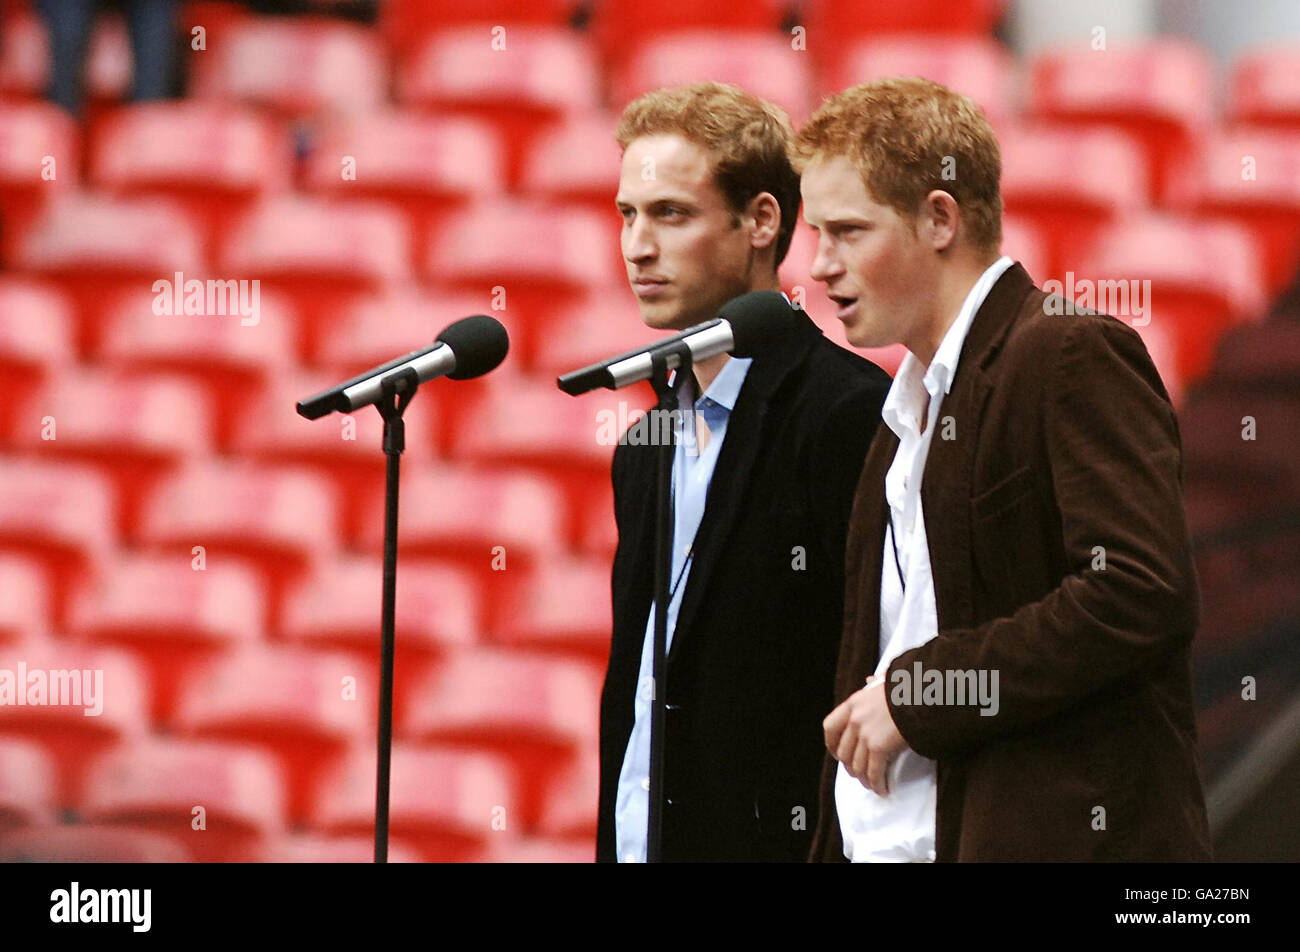 Britain's Prince Harry (right) and Prince William speak from the stage at Wembley Stadium, north-west London, during today's star-studded pop concert in memory of their mother, Diana, Princess of Wales. Stock Photo